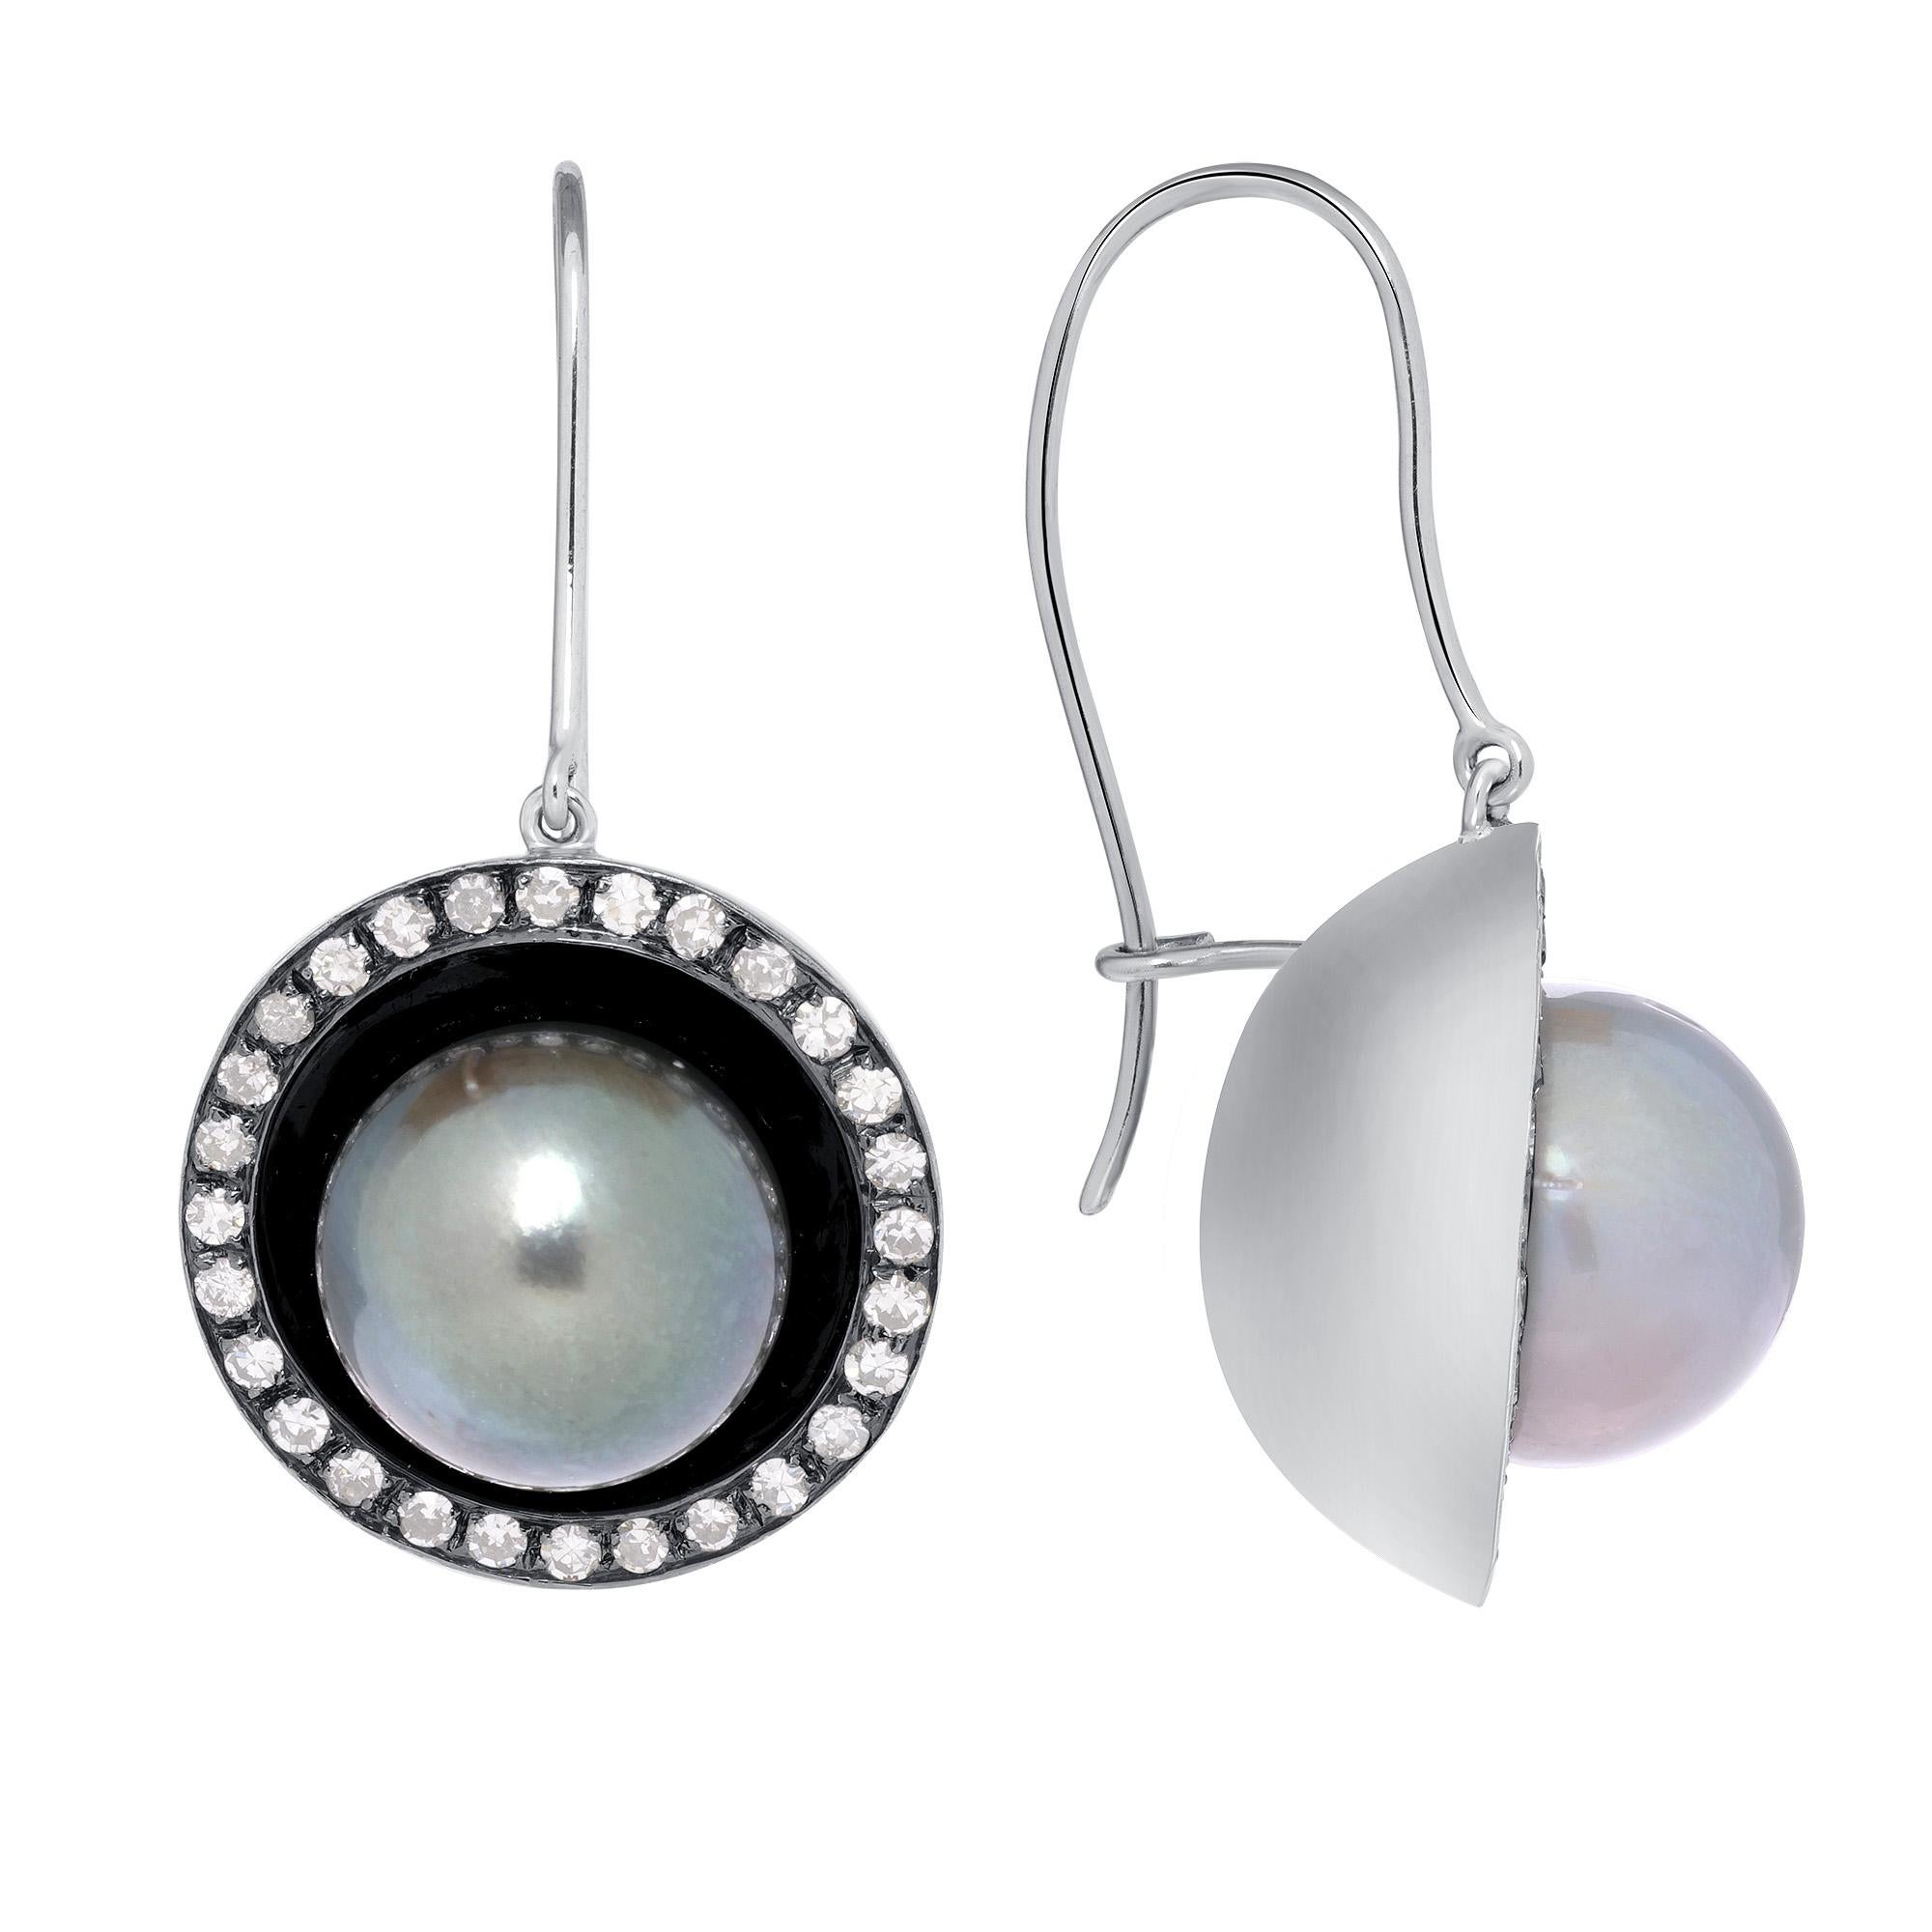 Tahitian Pearl, Diamond, White Gold Dangle Earrings, In Stock. These dangle earrings are 1.04-carat total weight black pearls surrounded by single-cut diamonds. The diamonds are 1.04-carat total weight, SI1-G, and are all natural diamonds. The black